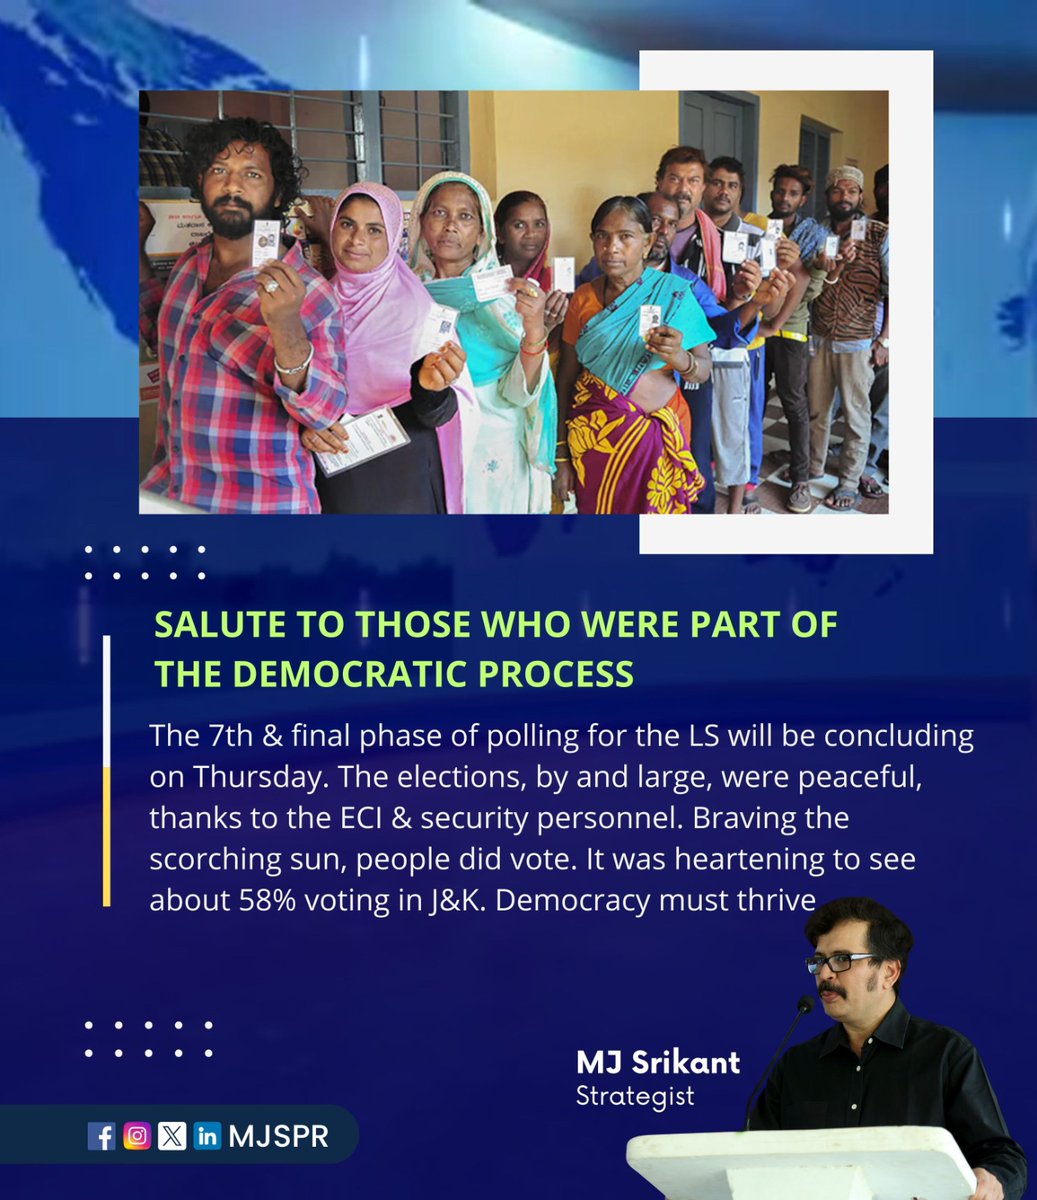 Salute to those who were part of the democratic process 

#Democracy #Voting #Election #Salute #DemocraticProcess #PeacefulElections #ECI #SecurityPersonnel #CivicDuty #BravingTheHeat #HighTurnout #JammuAndKashmir #DemocracyMustThrive